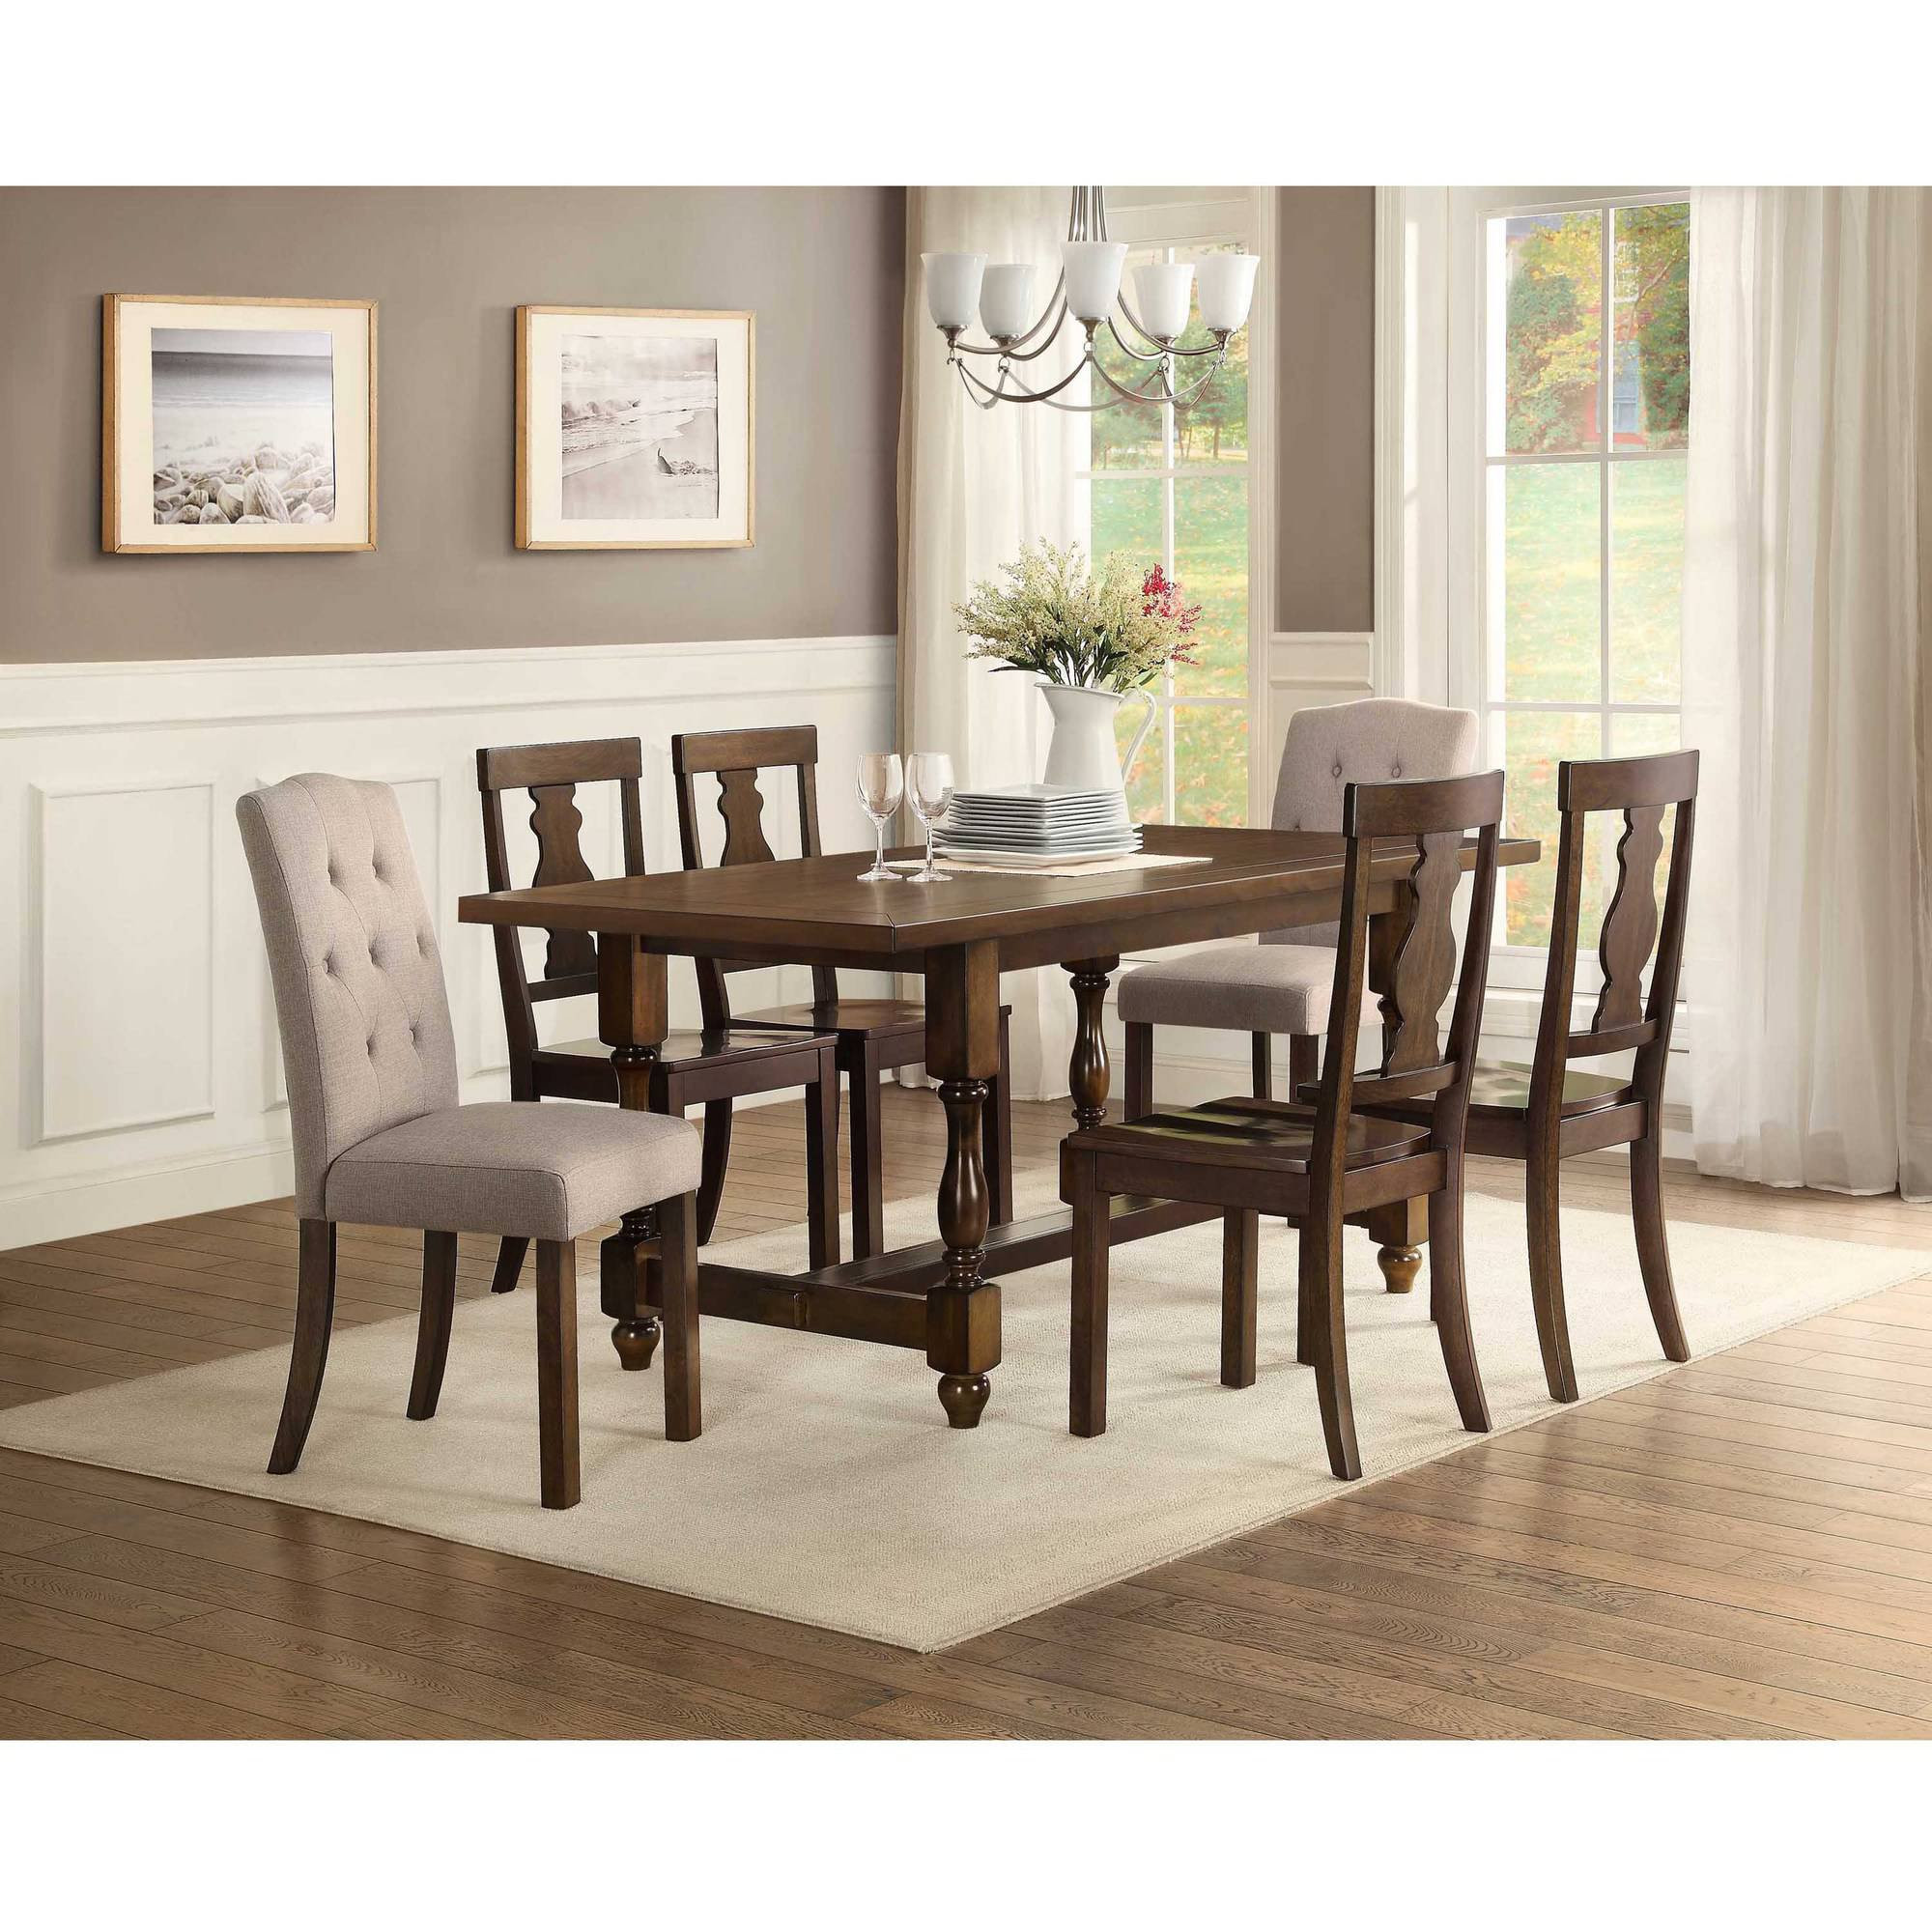 Small Kitchen Tables
 Small Kitchen Table with Two Chairs Walmart